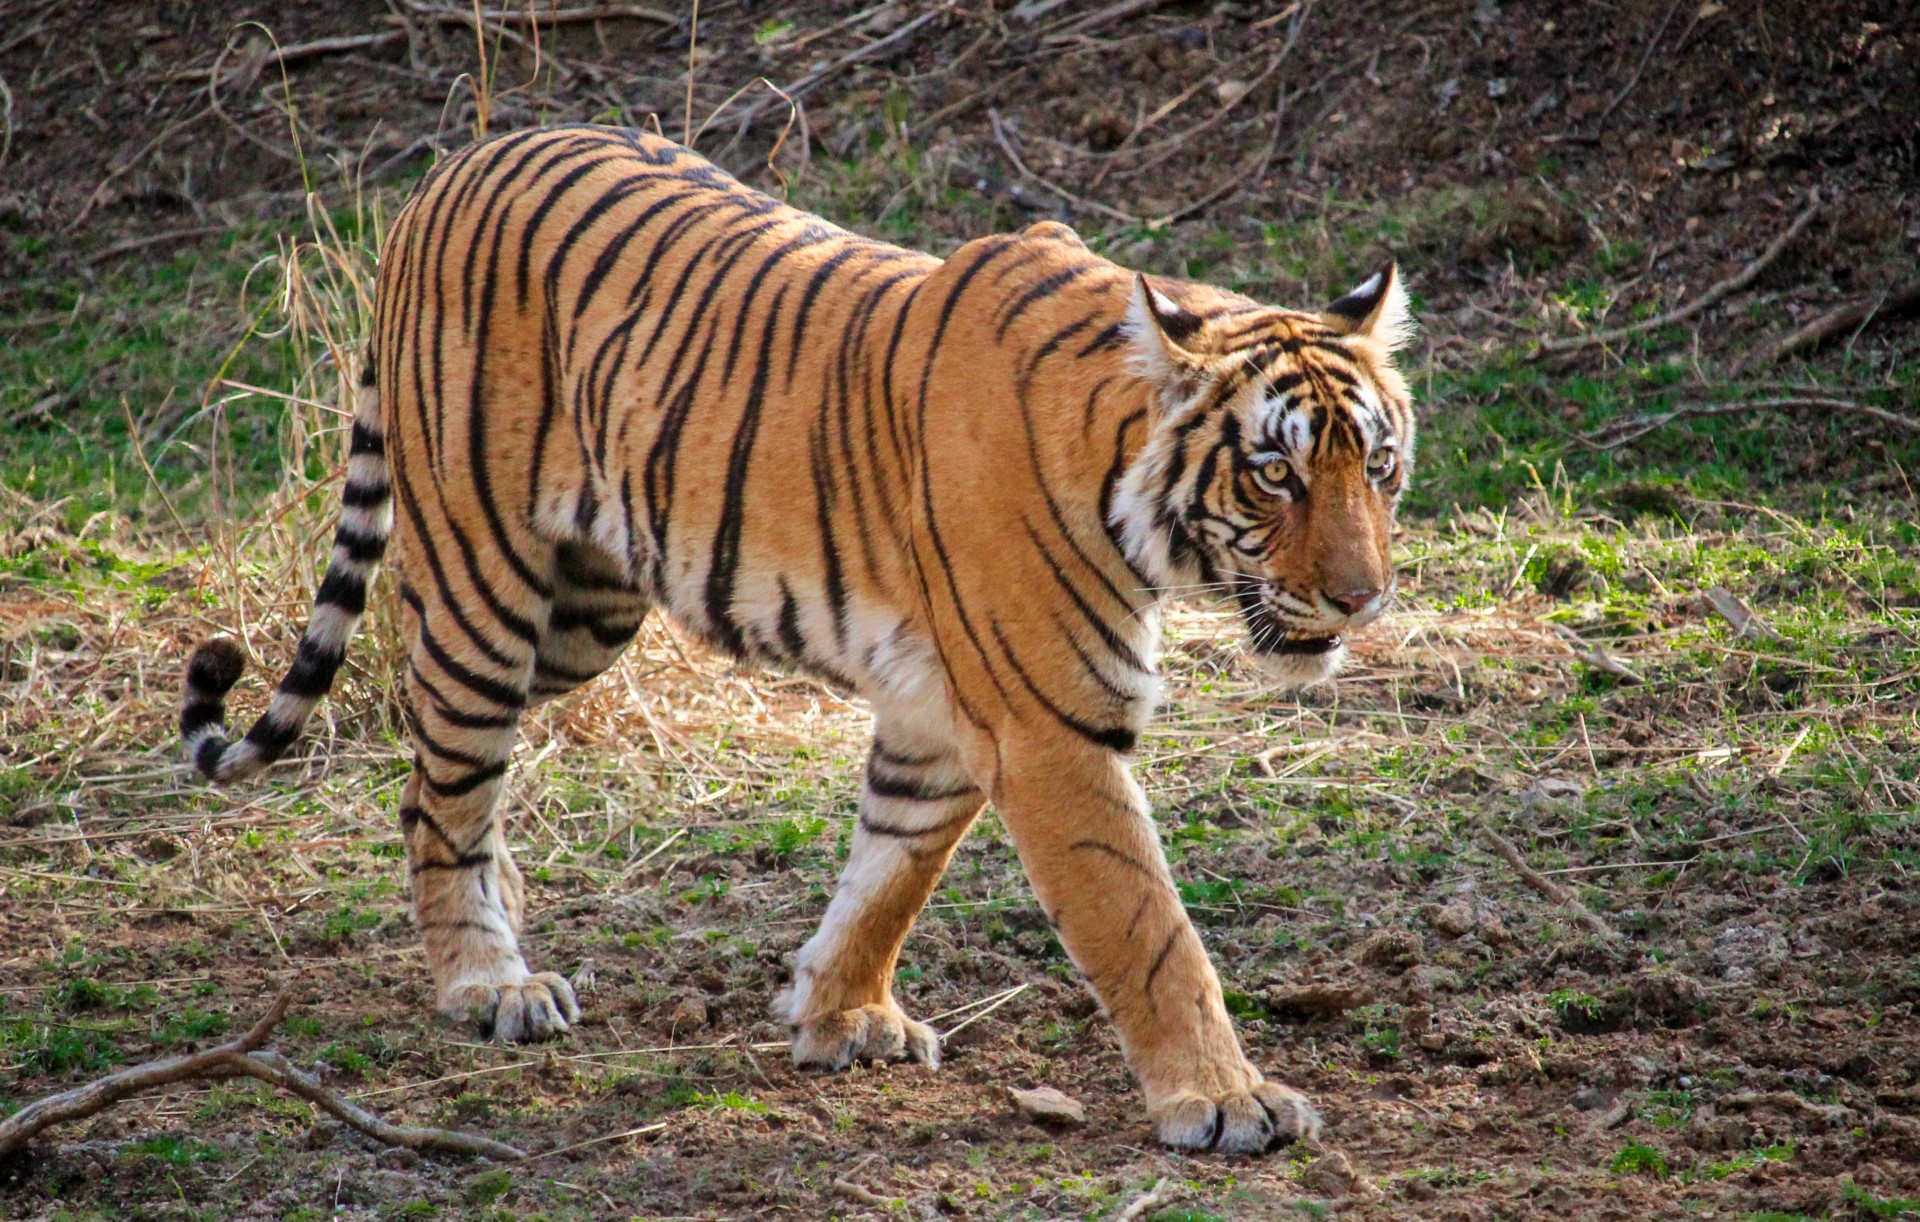 Be a responsible tourist post COVID19 Help end cruelty towards Tigers   World Animal Protection